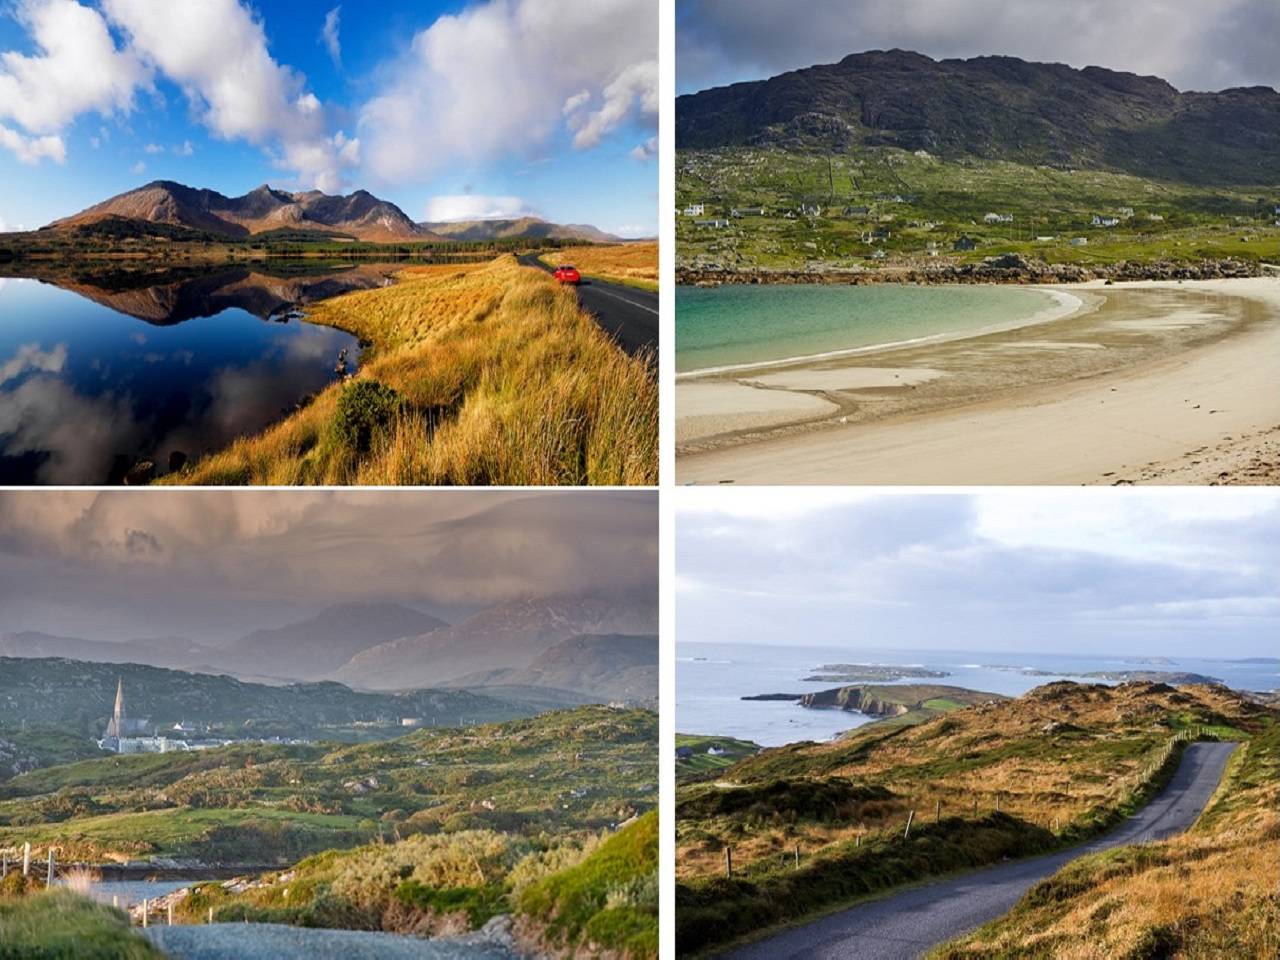 Connemara - Explore the wilderness of Ireland | One can visit both Ireland and UK on a single visa